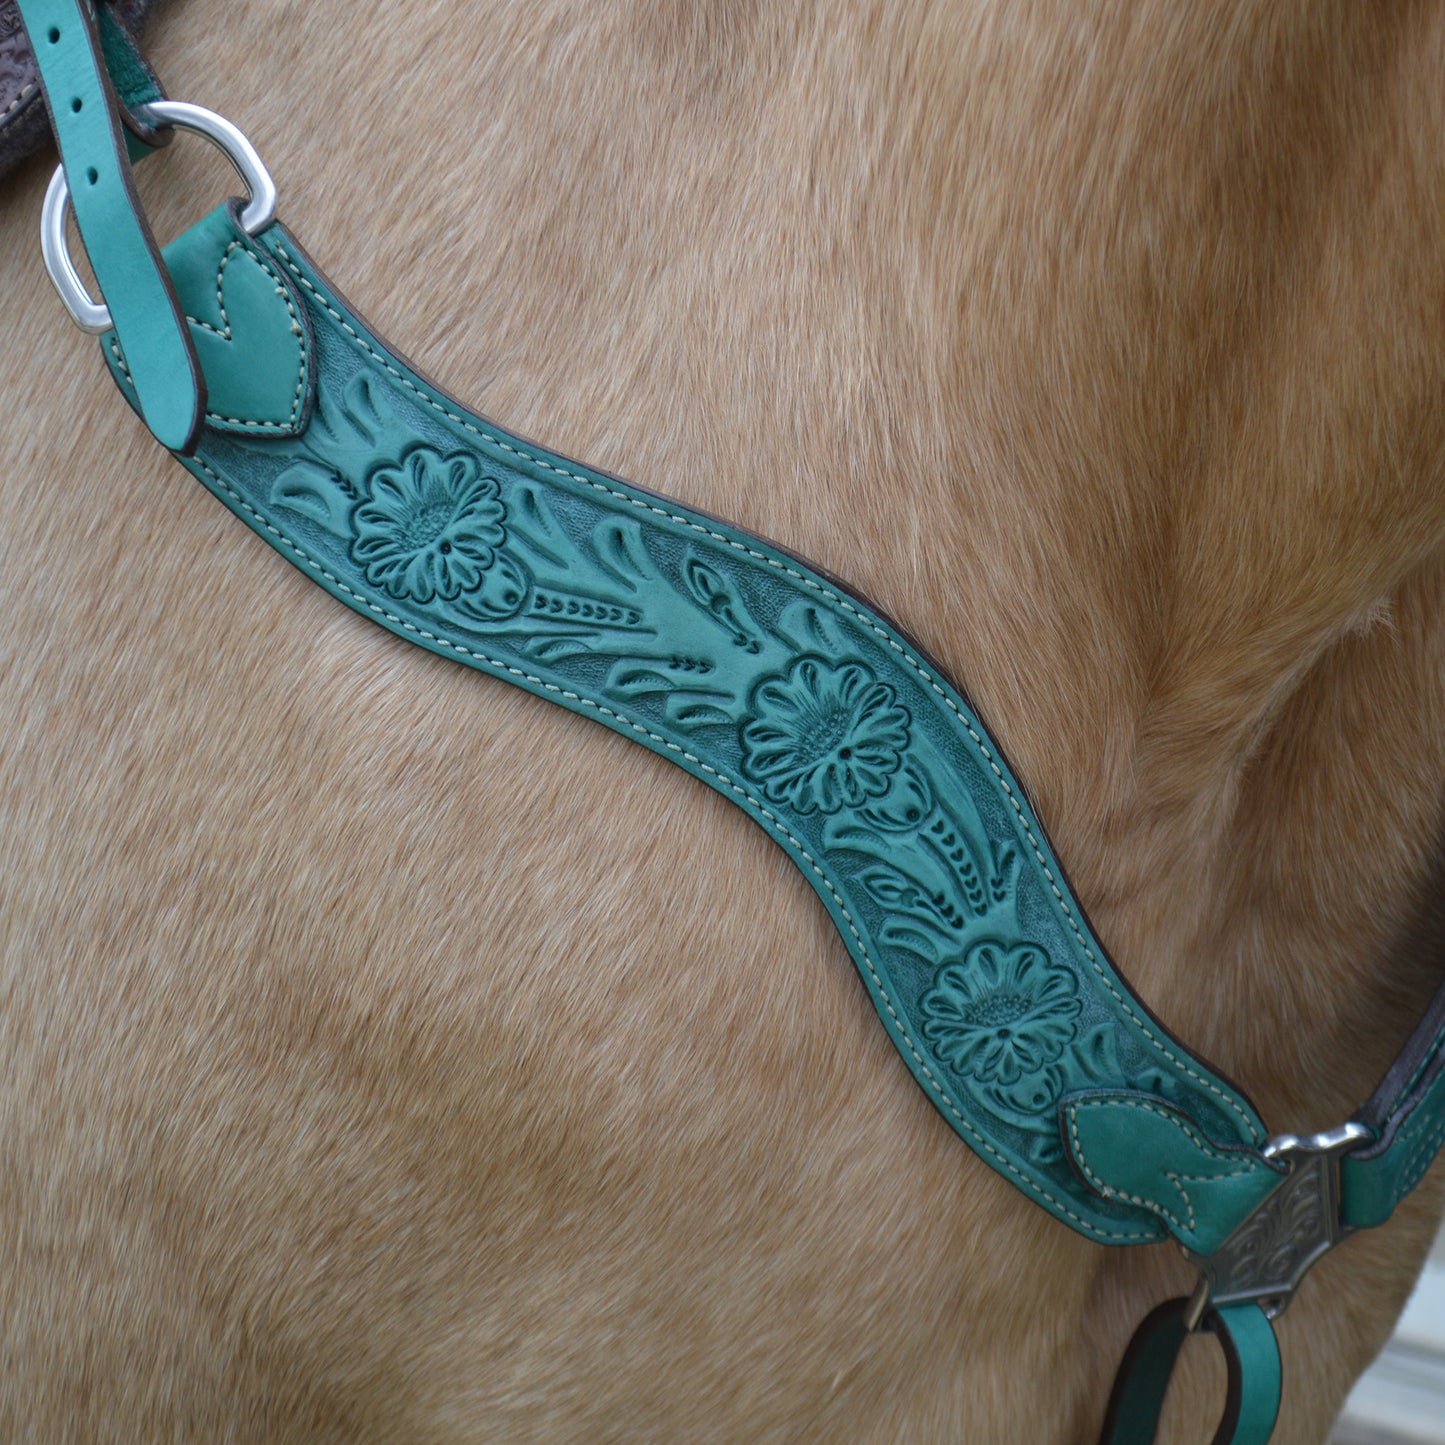 3017-QS 2-1/2" Wave breast collar rough out turquoise leather floral tooled